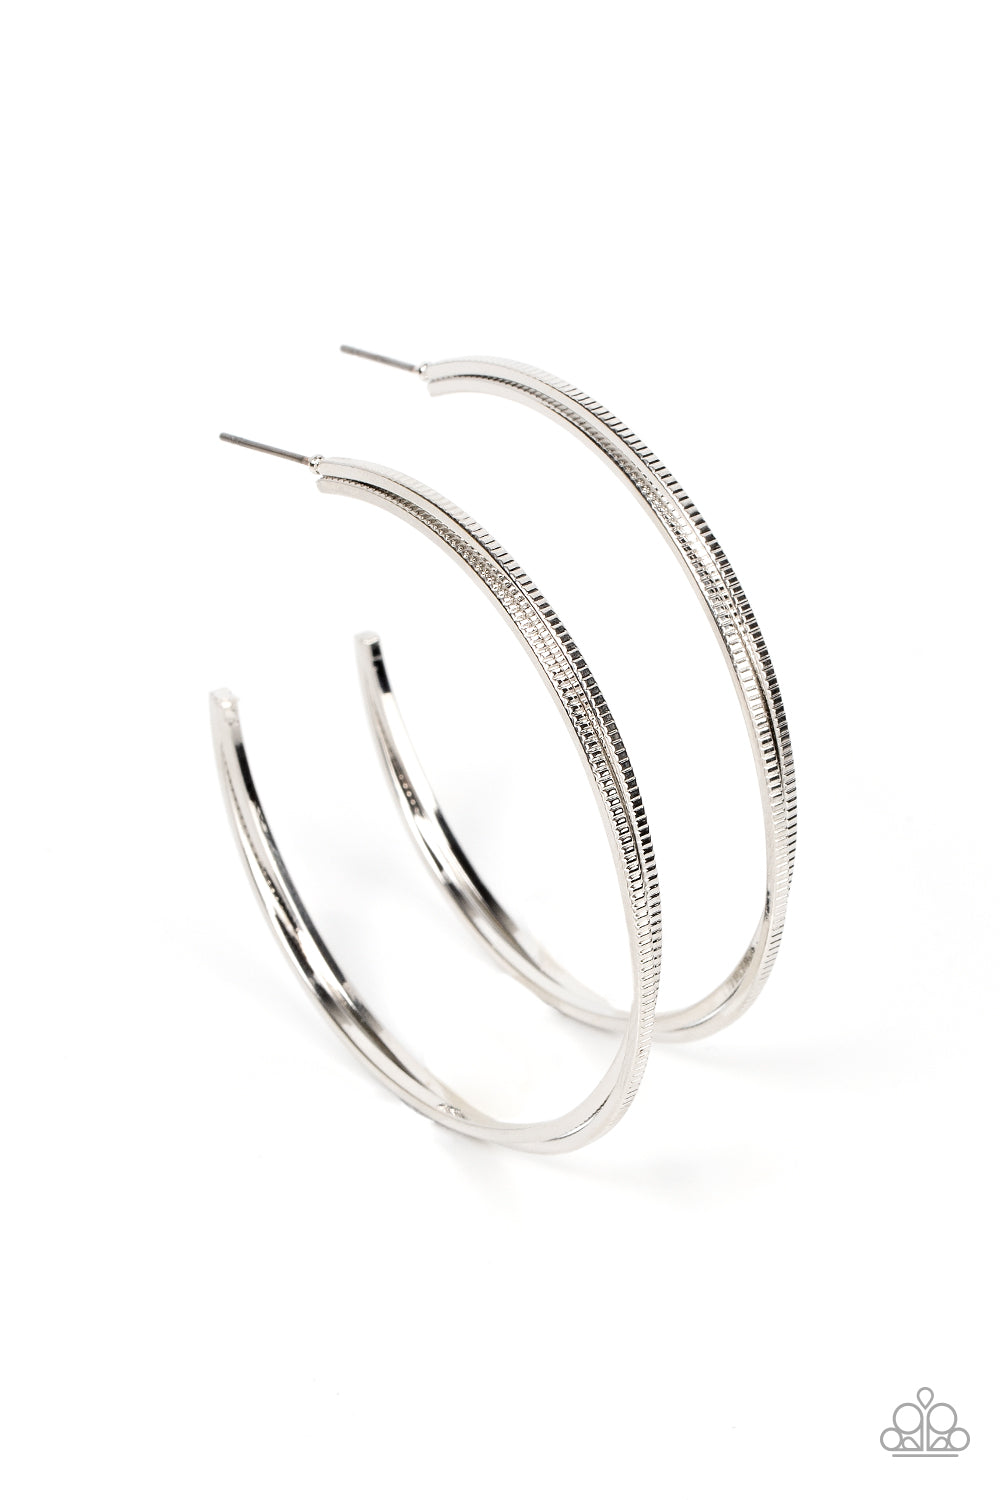 Etched in ribbed texture, two glistening silver bars gently curve and stack into an oversized hoop for a classic metallic look. Earring attaches to a standard post fitting. Hoop measures approximately 2" in diameter.